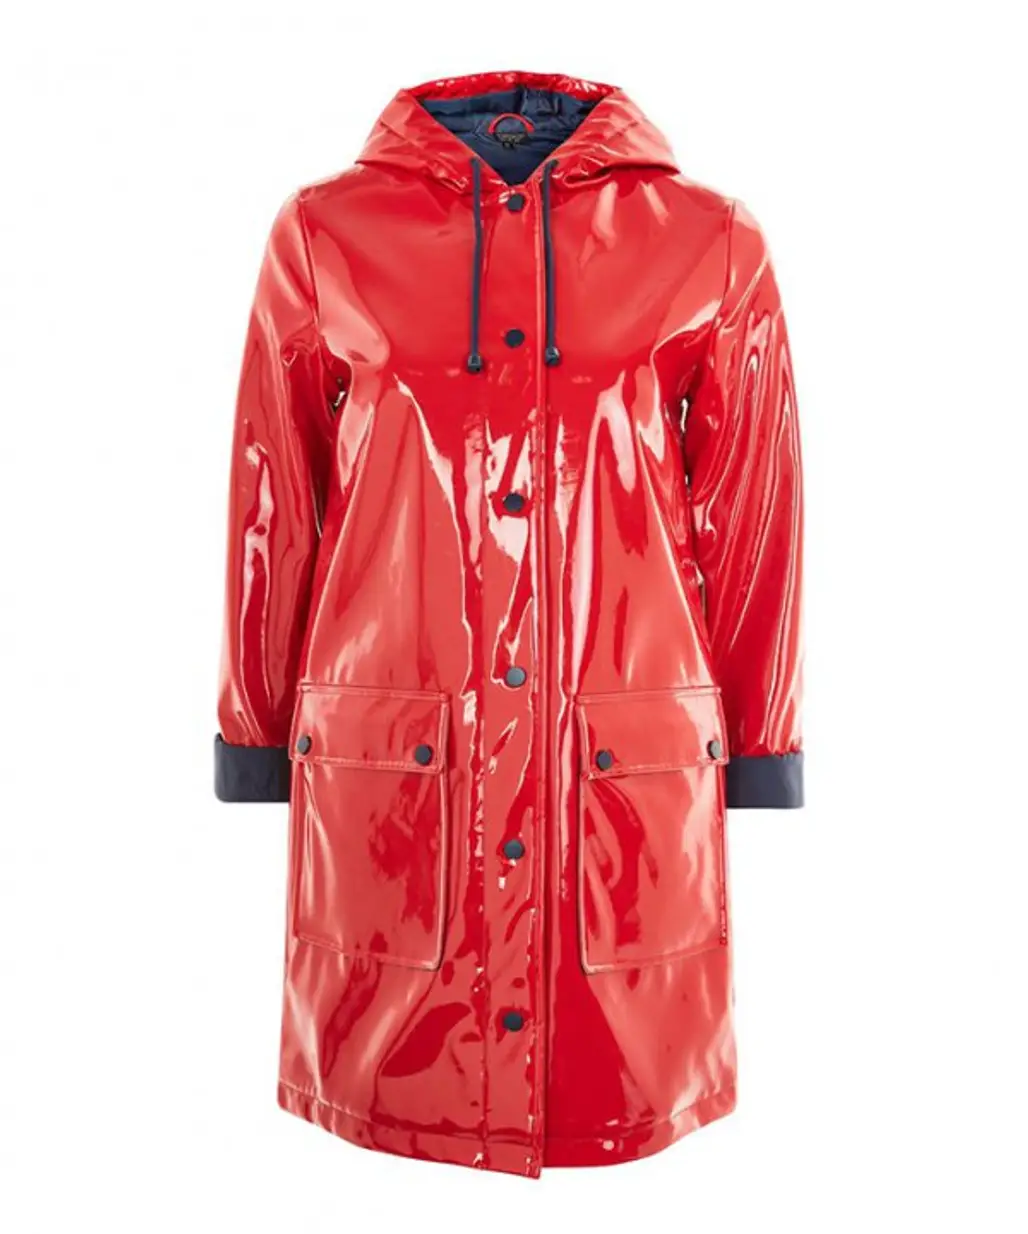 clothing, red, jacket, outerwear, sleeve,